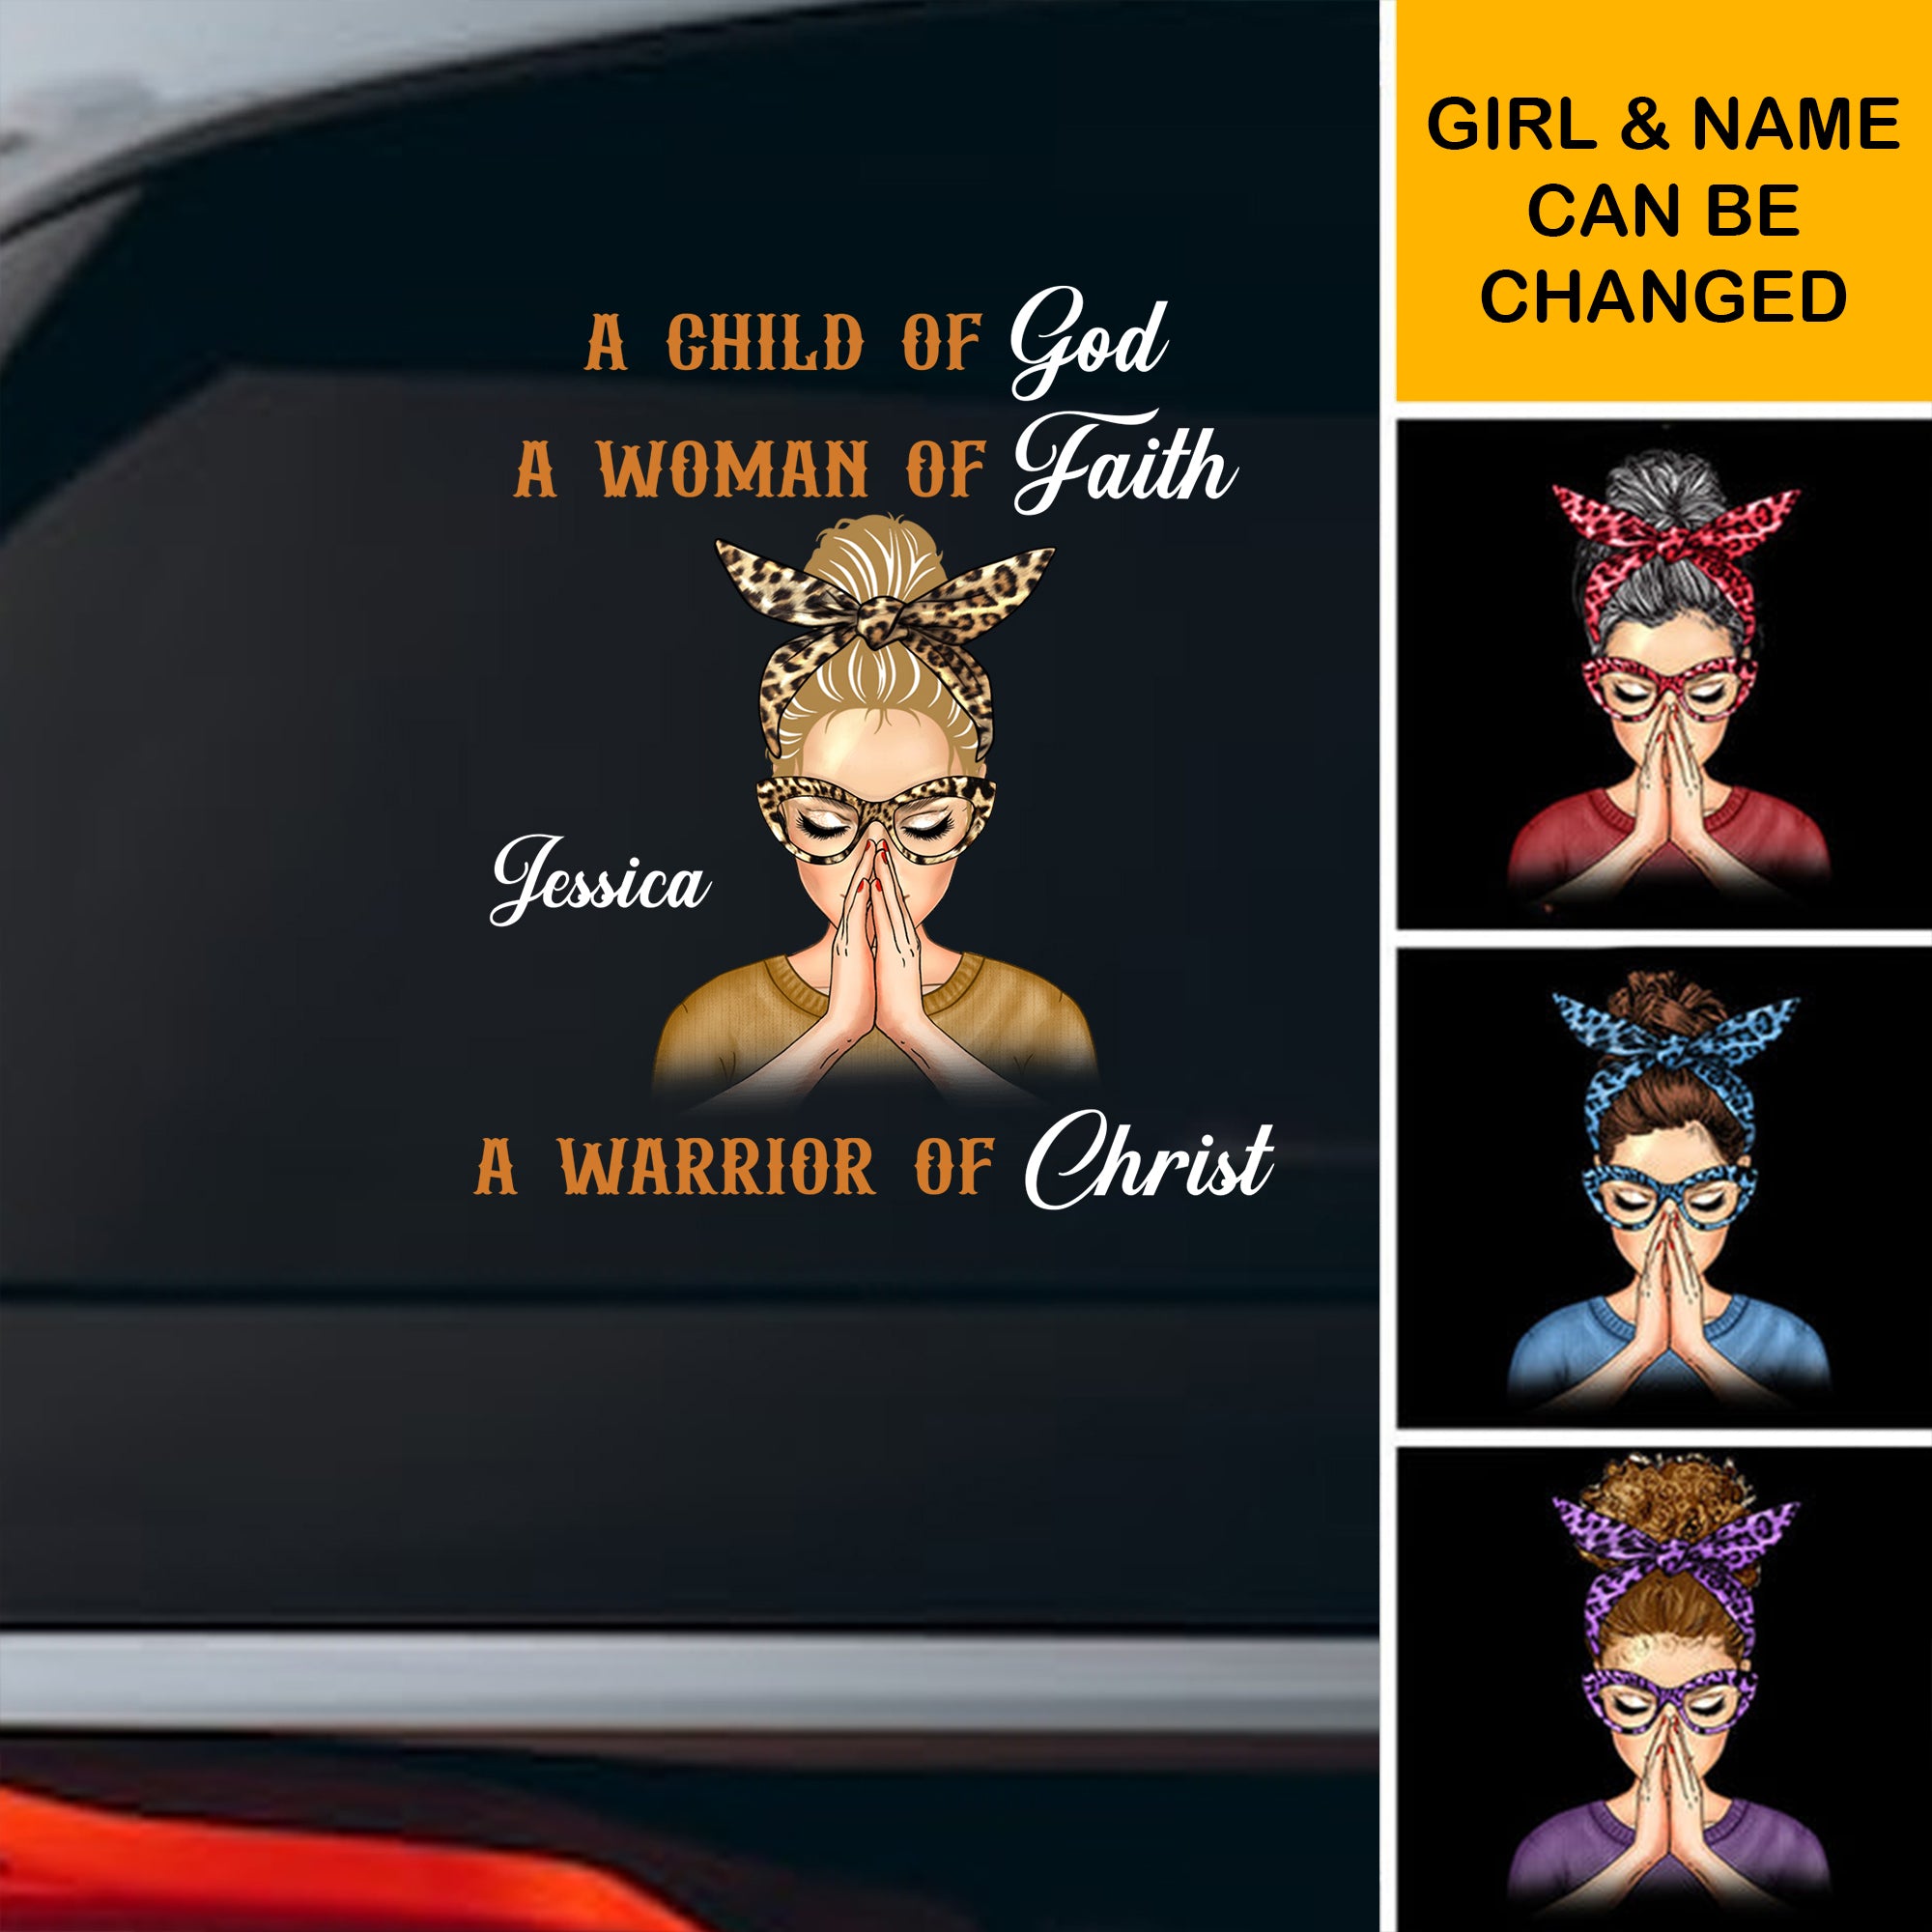 A Child Of God A Woman Of Faith A Warrior Of Christ - Custome Appearance And Name - Personalized Sticker Decal